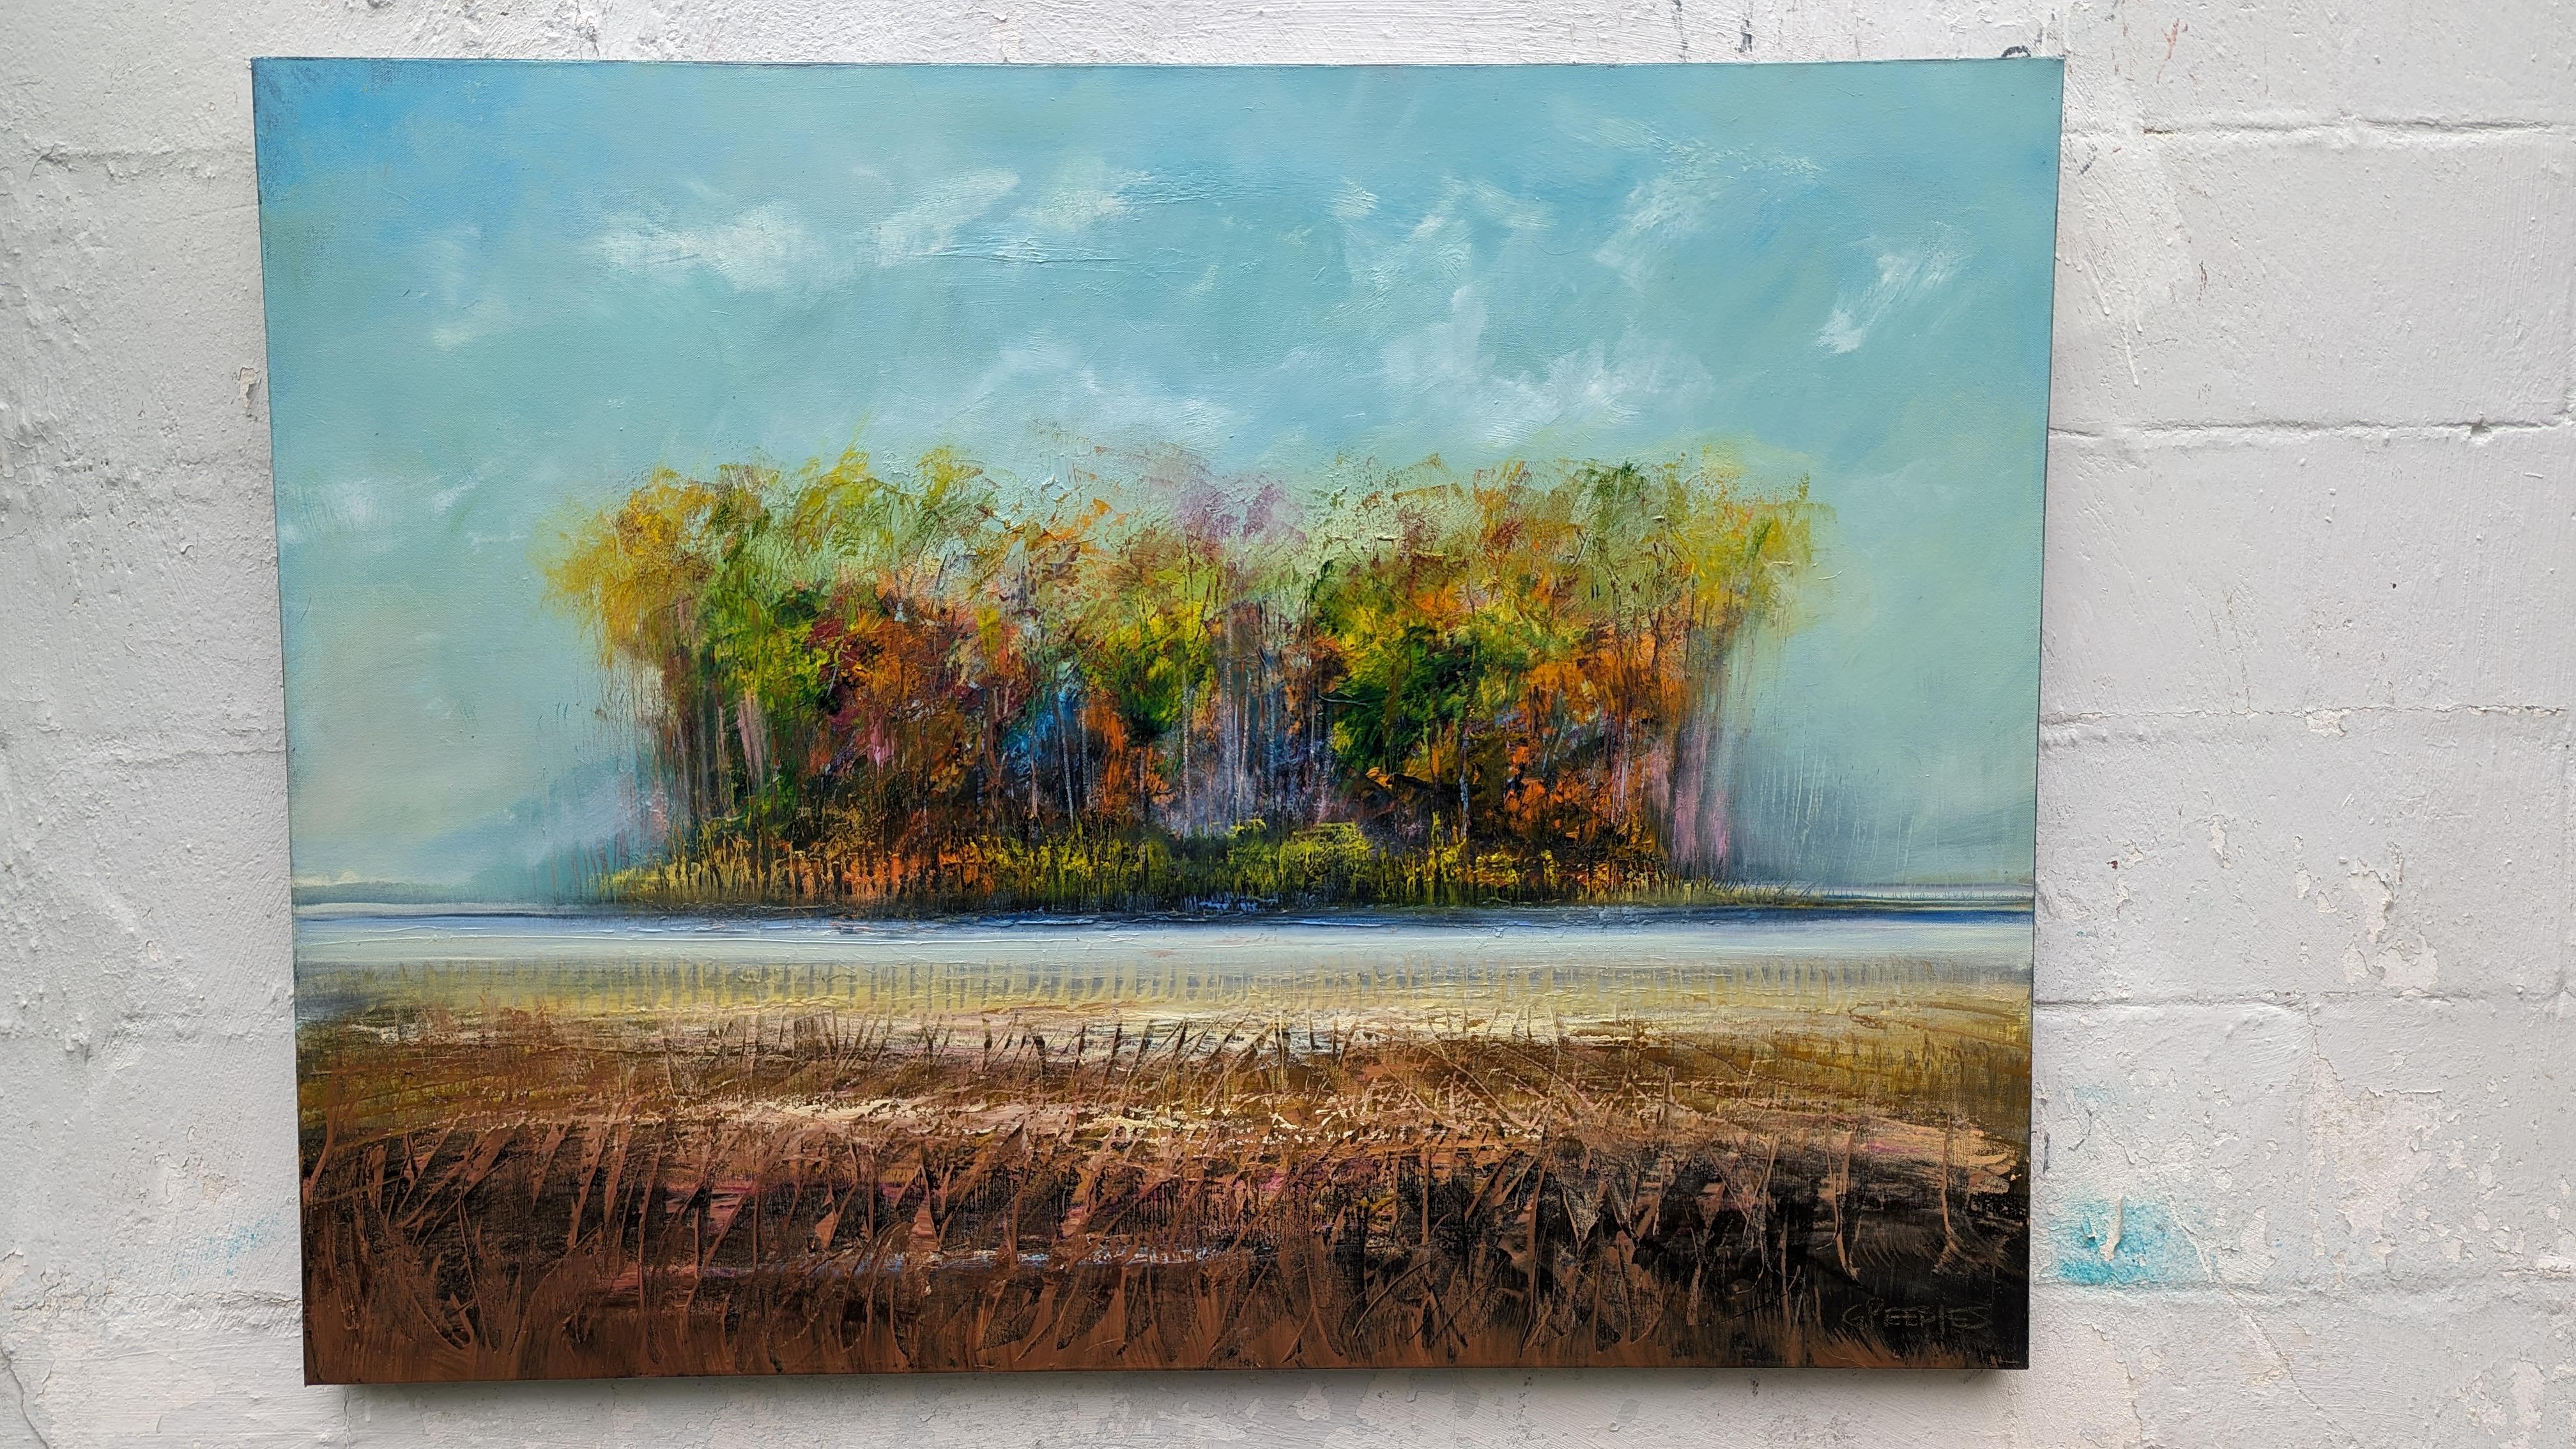 <p>Artist Comments<br>Artist George Peebles displays an expressionist landscape bringing autumnal hues together in one area. The green leaves turn a fiery red as the season changes. Breathtaking combinations of brilliant gradients map out the entire